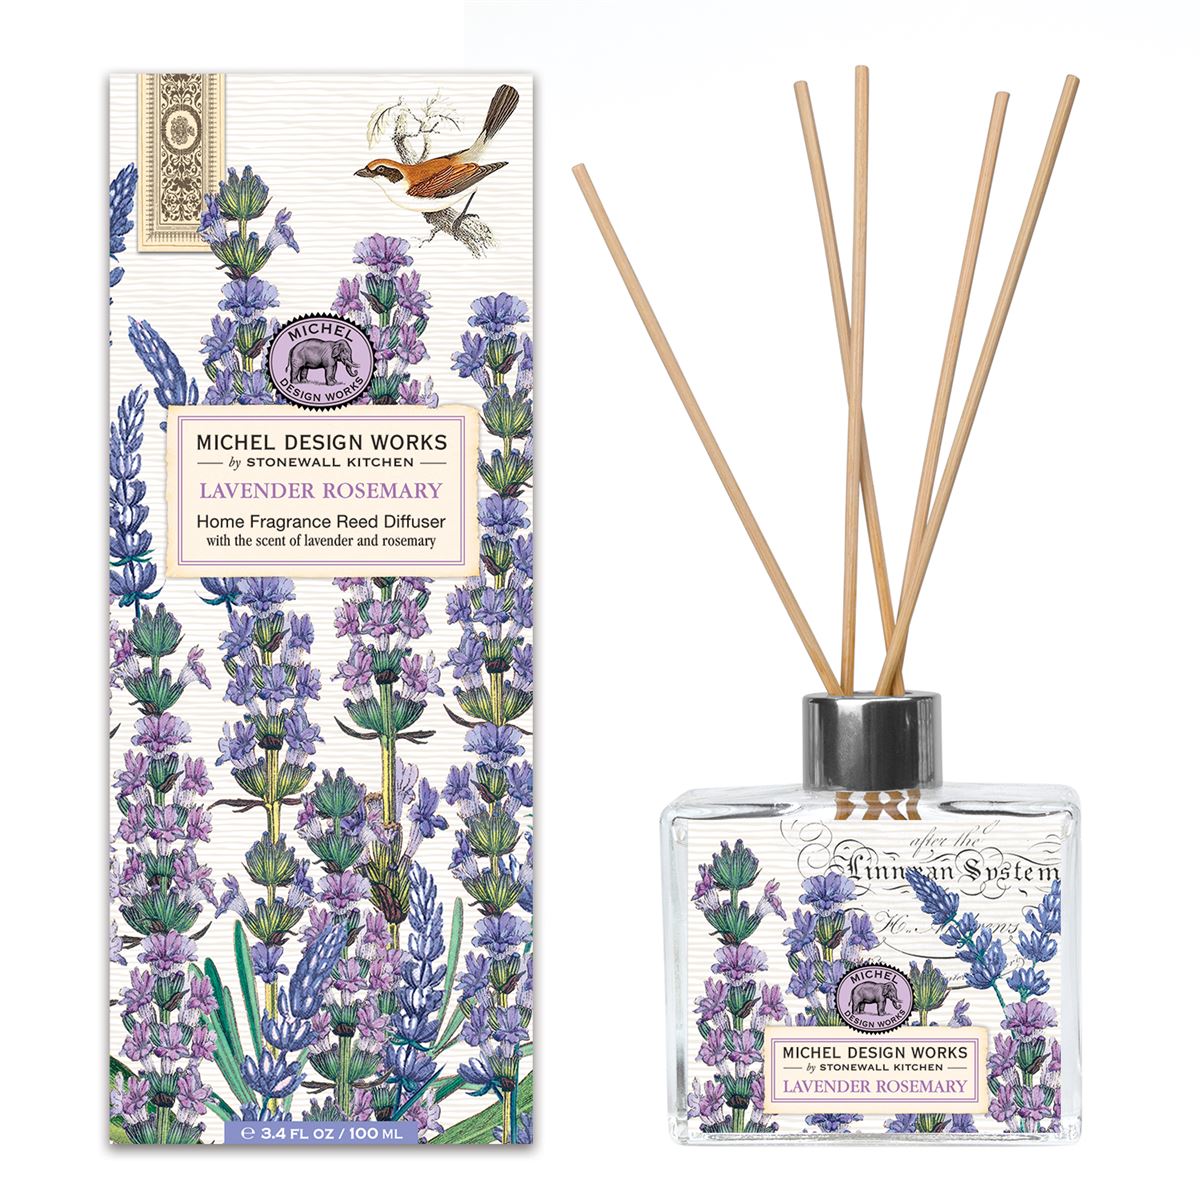 Michel Design Works - Lavender Rosemary Home Fragrance Reed Diffuser